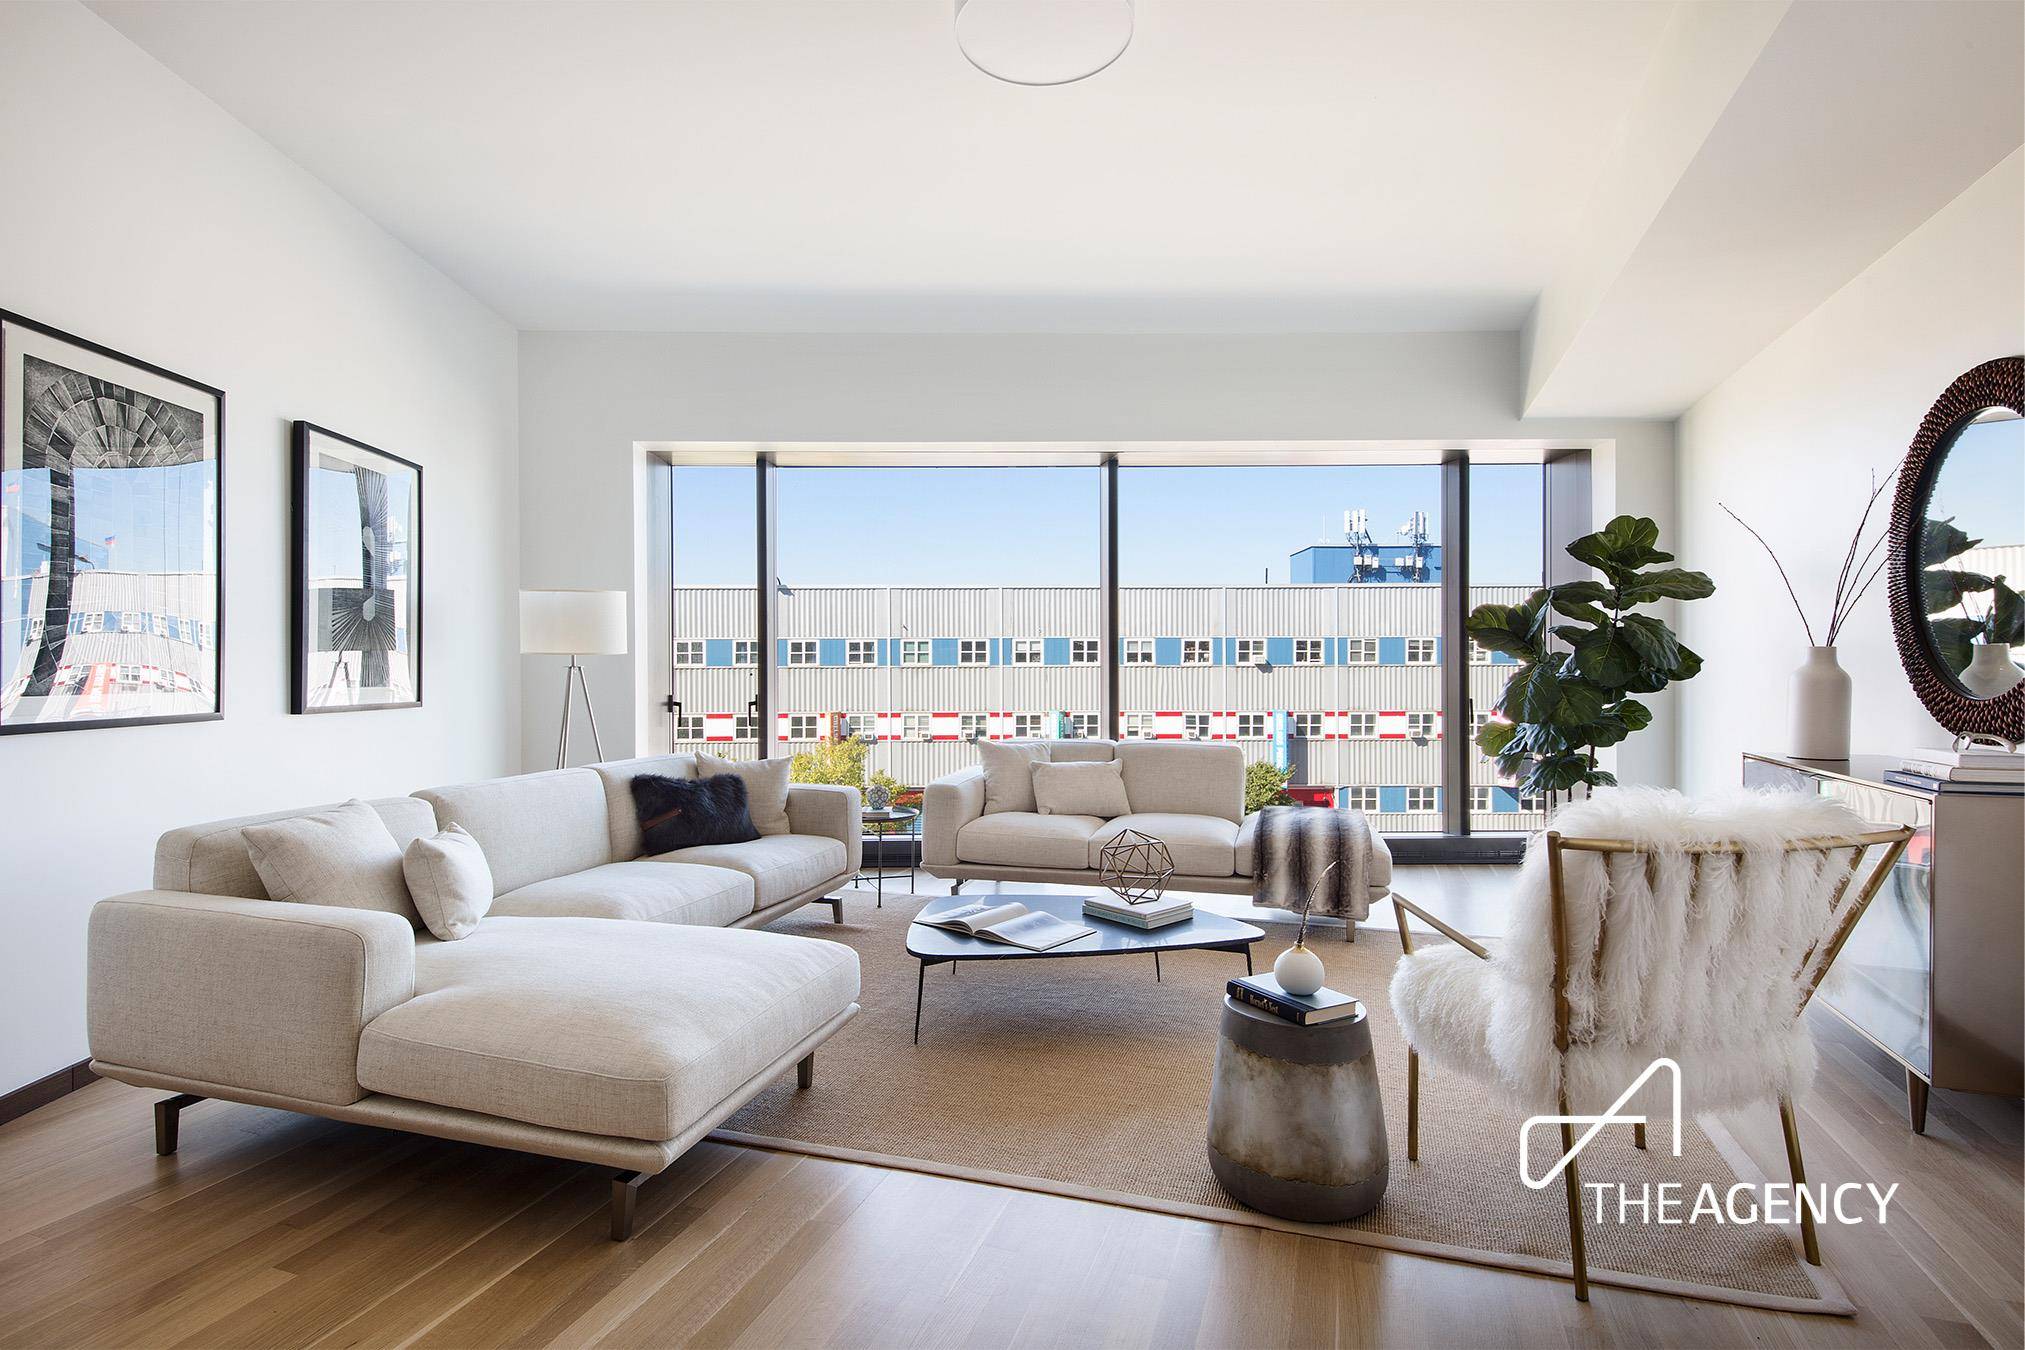 Step into timeless elegance with this stunning 2 bedroom, 2 and a half bath condominium residence, meticulously designed by the renowned Foster Partners.